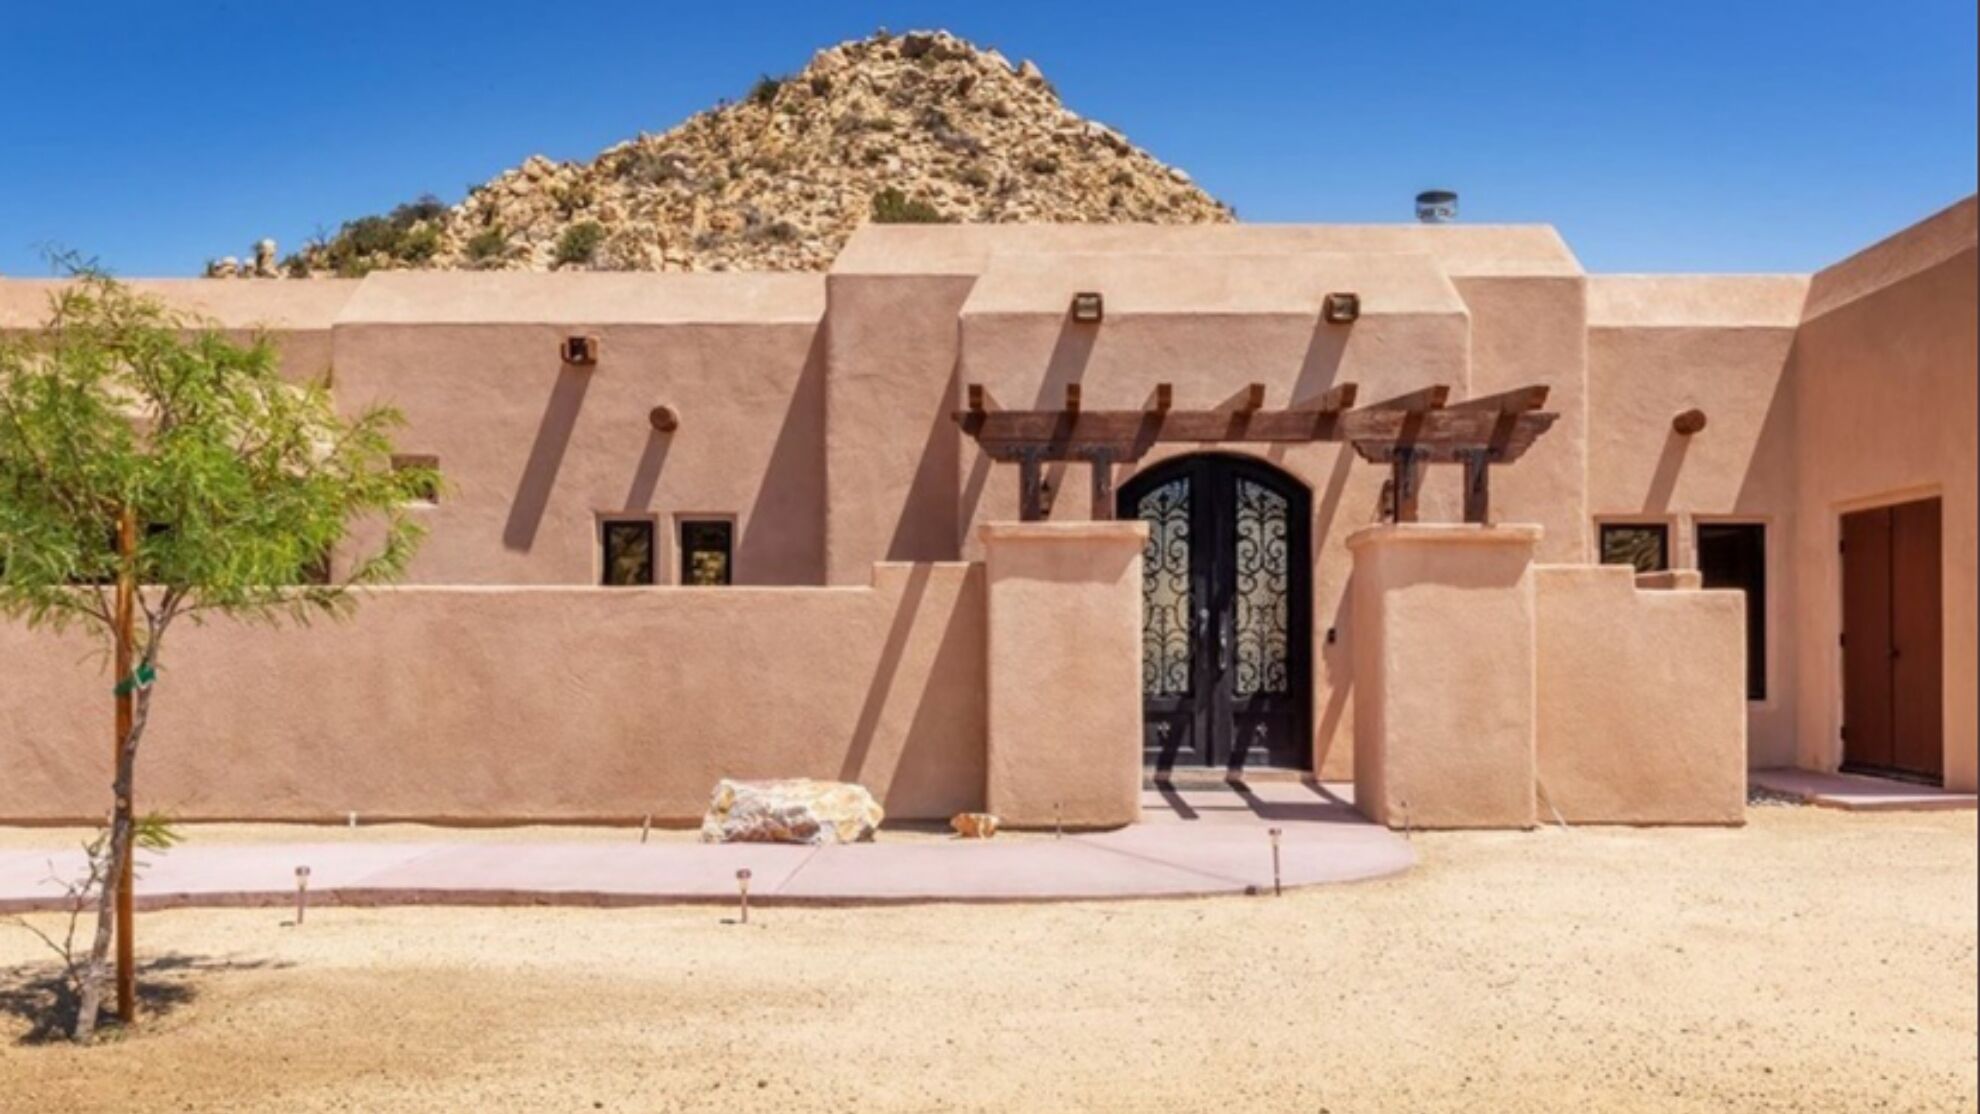 Amber Heard sells Yucca Valley home for $1 million